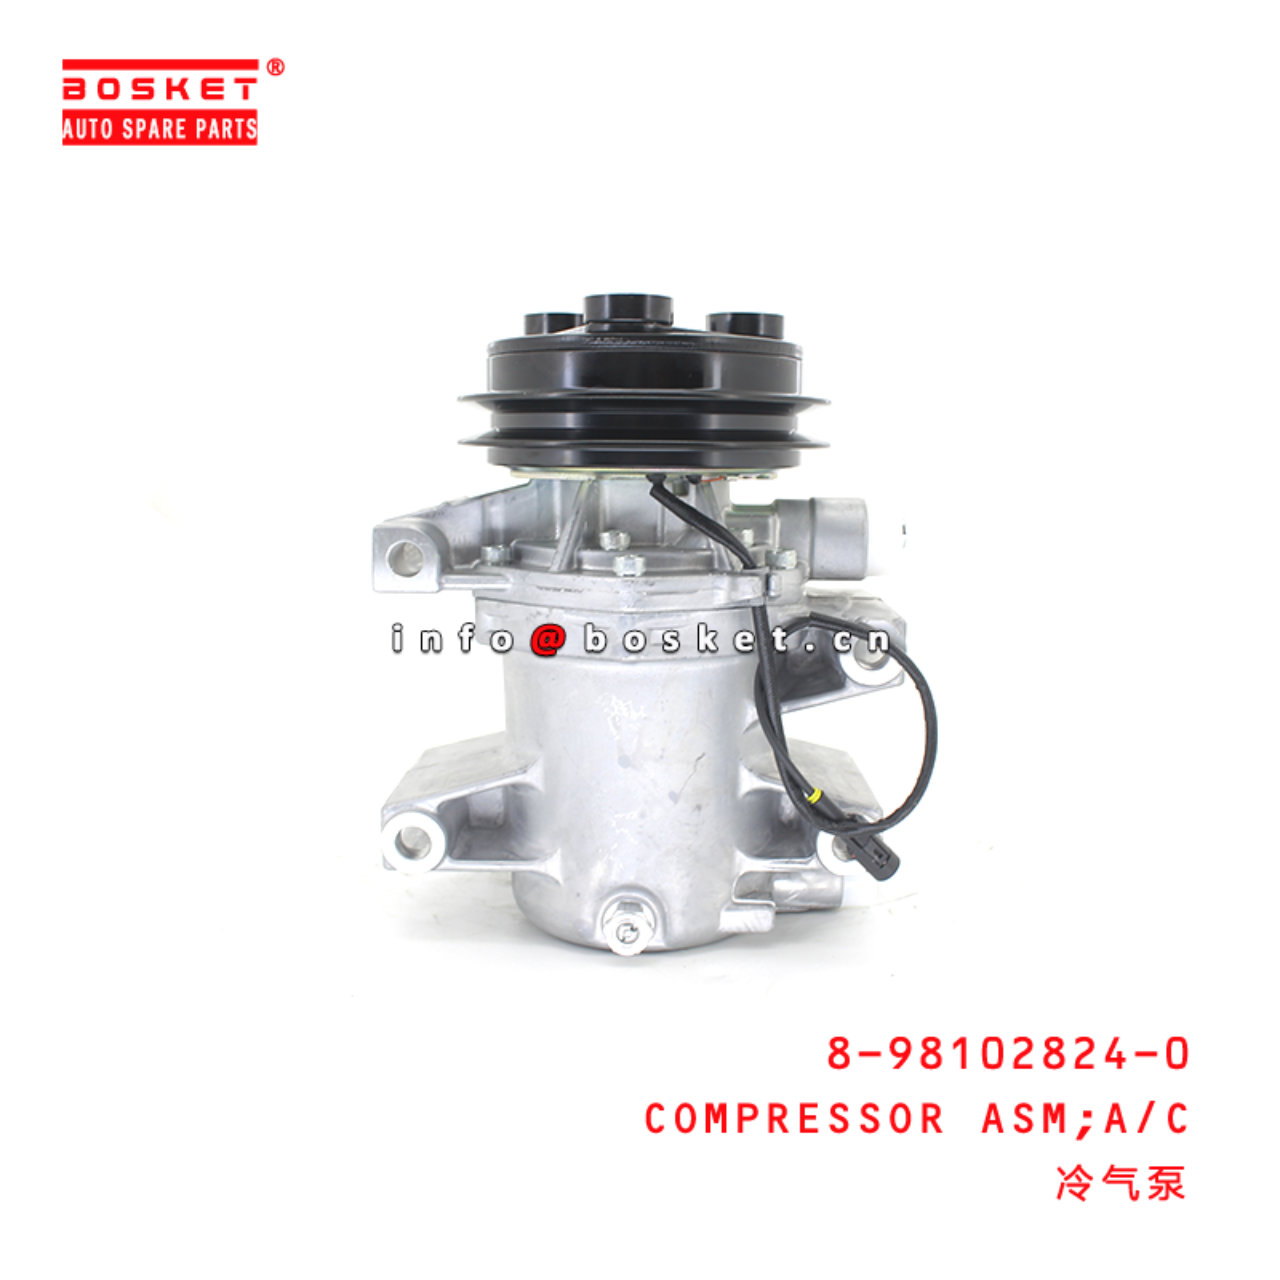 8-98102824-0 Air Compression Compressor Assembly Suitable for 